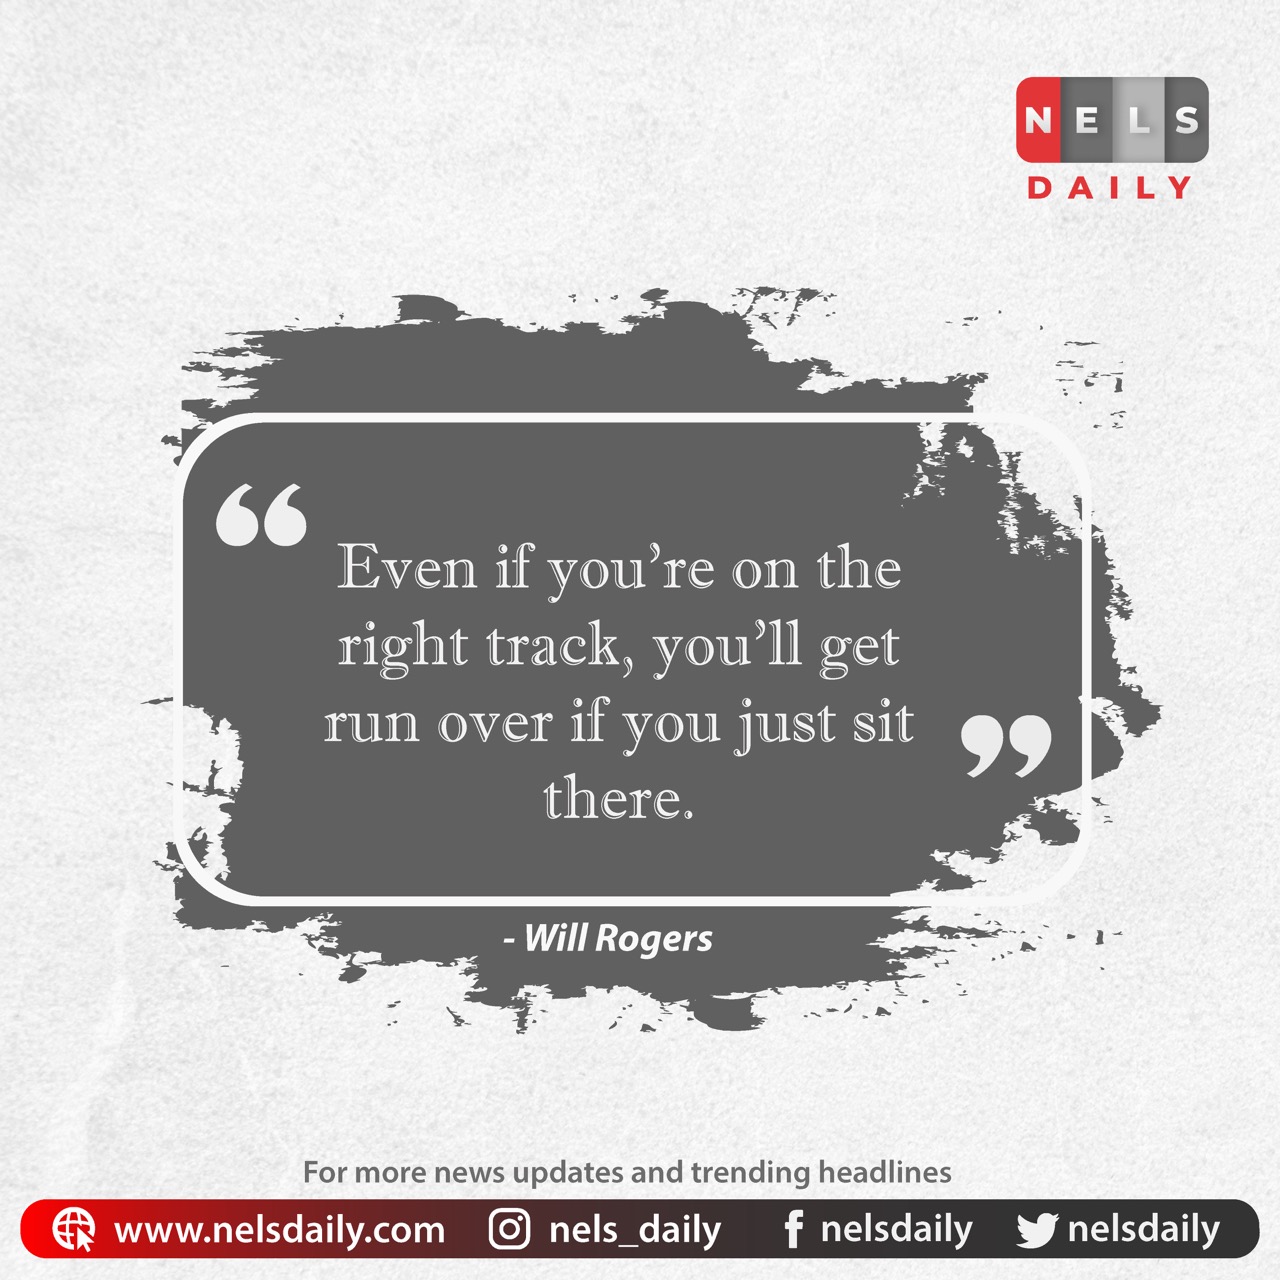 Nelsdaily Weekly Nuggets - even if you are on the right track you will get run over if you just sit there - Week 40